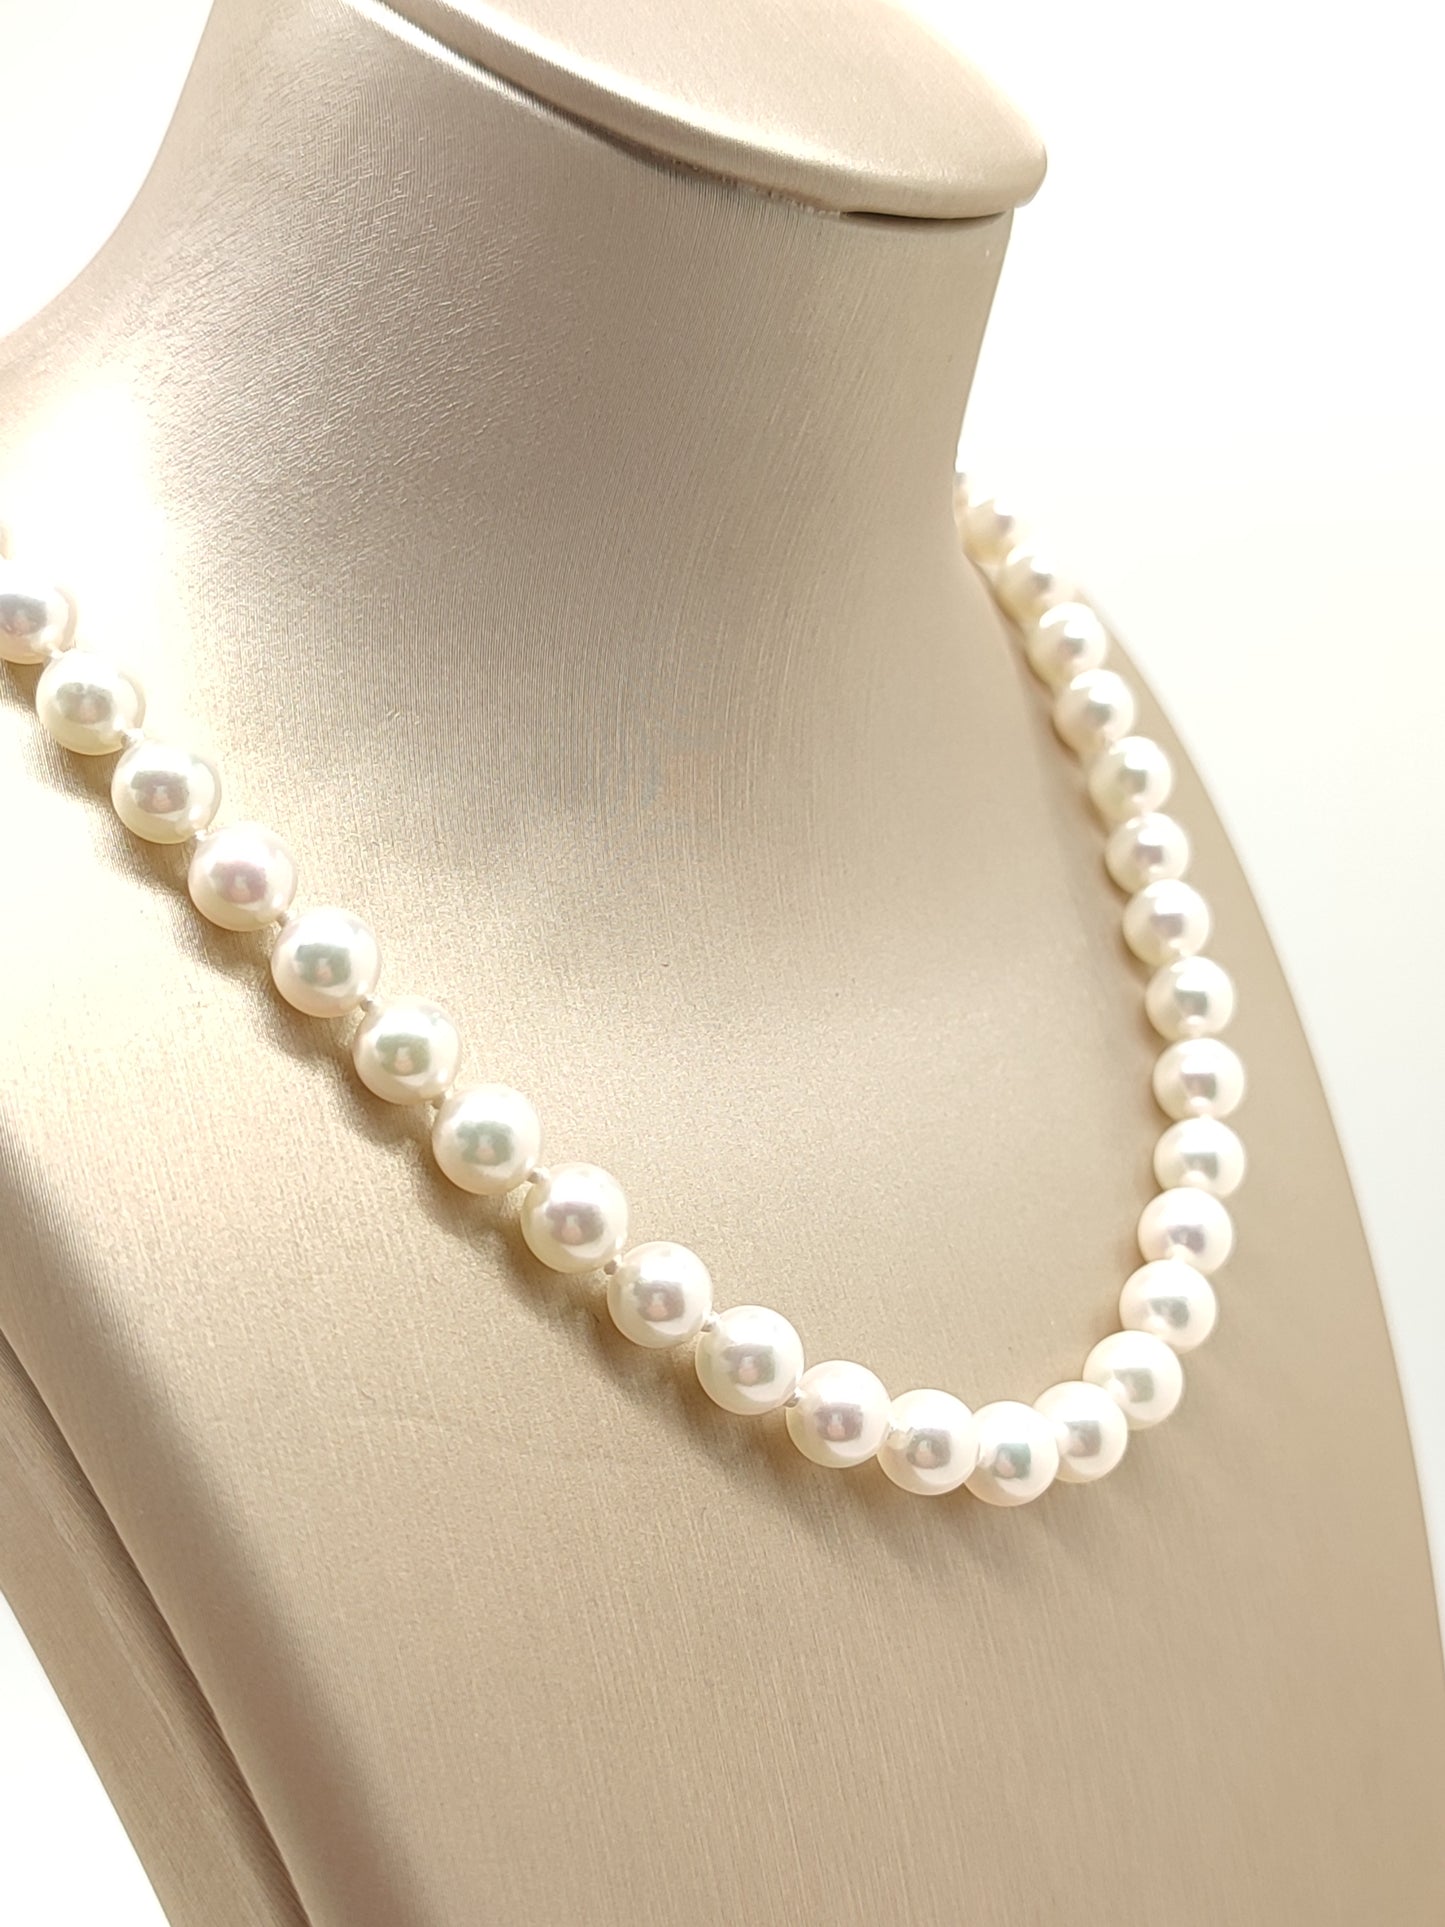 Gold necklace with MIkimoto pearls